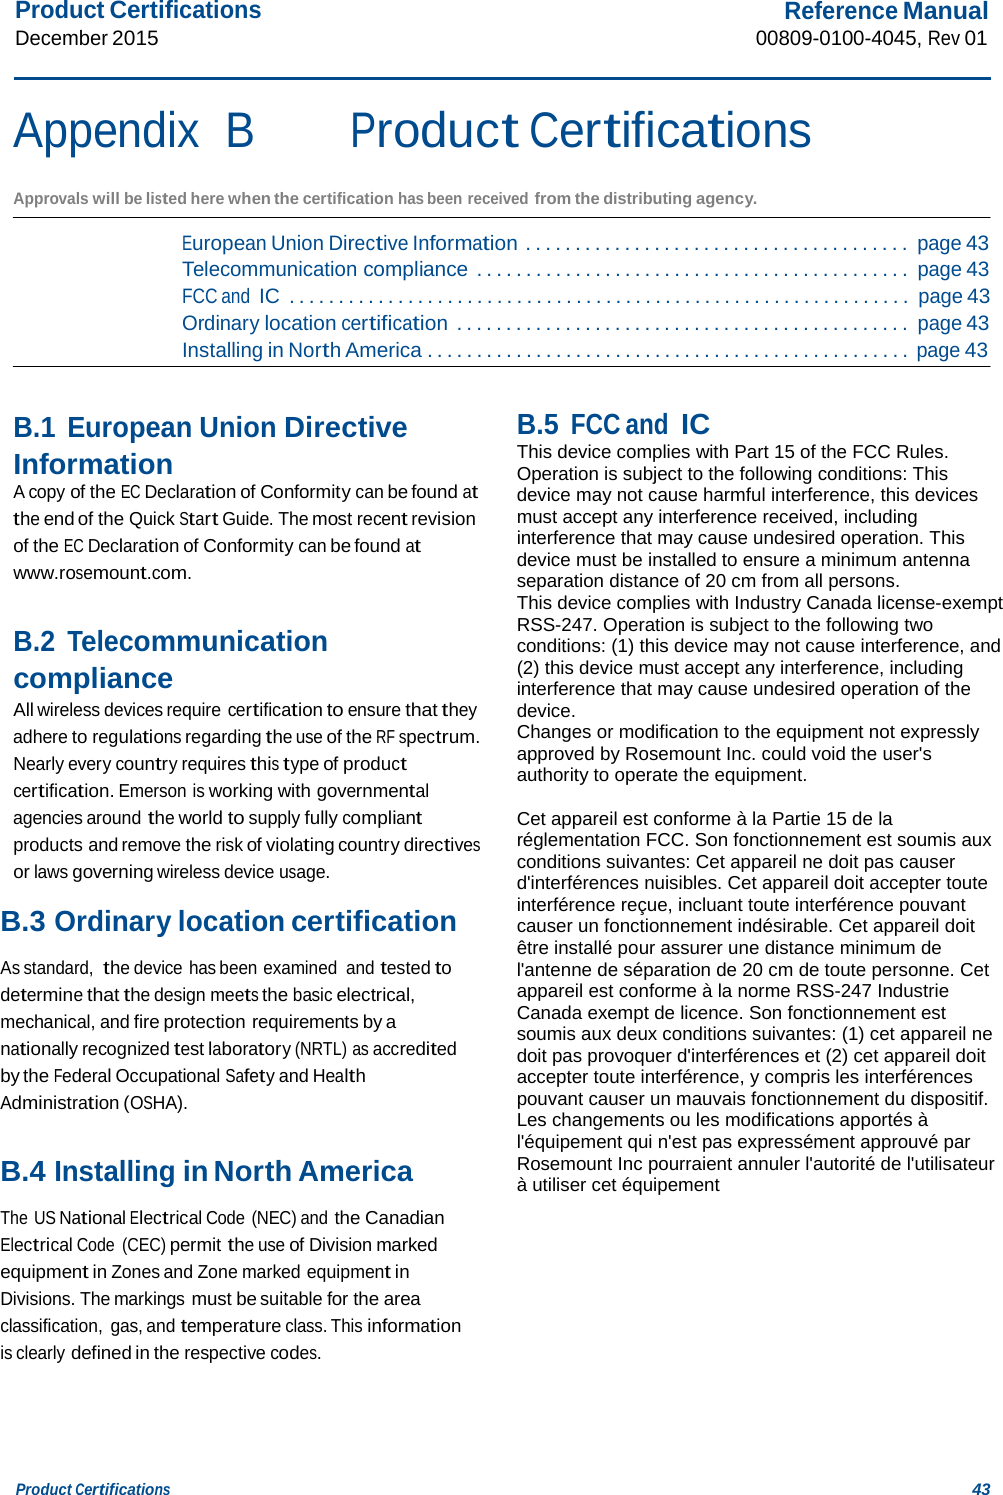 Product Certifications December 2015 Reference Manual 00809-0100-4045, Rev 01 Product Certifications 43    Appendix  B Product Certifications  Approvals will be listed here when the certification has been received from the distributing agency.  European Union Directive Information . . . . . . . . . . . . . . . . . . . . . . . . . . . . . . . . . . . . . . . page 43 Telecommunication compliance . . . . . . . . . . . . . . . . . . . . . . . . . . . . . . . . . . . . . . . . . . . . page 43 FCC and IC  . . . . . . . . . . . . . . . . . . . . . . . . . . . . . . . . . . . . . . . . . . . . . . . . . . . . . . . . . . . . . . . page 43 Ordinary location certification . . . . . . . . . . . . . . . . . . . . . . . . . . . . . . . . . . . . . . . . . . . . . . page 43 Installing in North America . . . . . . . . . . . . . . . . . . . . . . . . . . . . . . . . . . . . . . . . . . . . . . . . . page 43   B.1 European Union Directive Information A copy of the EC Declaration of Conformity can be found at the end of the Quick Start Guide. The most recent revision of the EC Declaration of Conformity can be found at www.rosemount.com.   B.2 Telecommunication compliance All wireless devices require certification to ensure that they adhere to regulations regarding the use of the RF spectrum. Nearly every country requires this type of product certification. Emerson is working with governmental agencies around the world to supply fully compliant products and remove the risk of violating country directives or laws governing wireless device usage.  B.3 Ordinary location certification  As standard,  the device has been examined and tested to determine that the design meets the basic electrical, mechanical, and fire protection requirements by a nationally recognized test laboratory (NRTL) as accredited by the Federal Occupational Safety and Health Administration (OSHA).   B.4 Installing in North America  The US National Electrical Code (NEC) and the Canadian Electrical Code  (CEC) permit the use of Division marked equipment in Zones and Zone marked equipment in Divisions. The markings must be suitable for the area classification,  gas, and temperature class. This information is clearly defined in the respective codes.     B.5 FCC and IC This device complies with Part 15 of the FCC Rules. Operation is subject to the following conditions: This device may not cause harmful interference, this devices must accept any interference received, including interference that may cause undesired operation. This device must be installed to ensure a minimum antenna separation distance of 20 cm from all persons. This device complies with Industry Canada license-exempt RSS-247. Operation is subject to the following two conditions: (1) this device may not cause interference, and (2) this device must accept any interference, including interference that may cause undesired operation of the device. Changes or modification to the equipment not expressly approved by Rosemount Inc. could void the user&apos;s authority to operate the equipment.  Cet appareil est conforme à la Partie 15 de la réglementation FCC. Son fonctionnement est soumis aux conditions suivantes: Cet appareil ne doit pas causer d&apos;interférences nuisibles. Cet appareil doit accepter toute interférence reçue, incluant toute interférence pouvant causer un fonctionnement indésirable. Cet appareil doit être installé pour assurer une distance minimum de l&apos;antenne de séparation de 20 cm de toute personne. Cet appareil est conforme à la norme RSS-247 Industrie Canada exempt de licence. Son fonctionnement est soumis aux deux conditions suivantes: (1) cet appareil ne doit pas provoquer d&apos;interférences et (2) cet appareil doit accepter toute interférence, y compris les interférences pouvant causer un mauvais fonctionnement du dispositif. Les changements ou les modifications apportés à l&apos;équipement qui n&apos;est pas expressément approuvé par Rosemount Inc pourraient annuler l&apos;autorité de l&apos;utilisateur à utiliser cet équipement